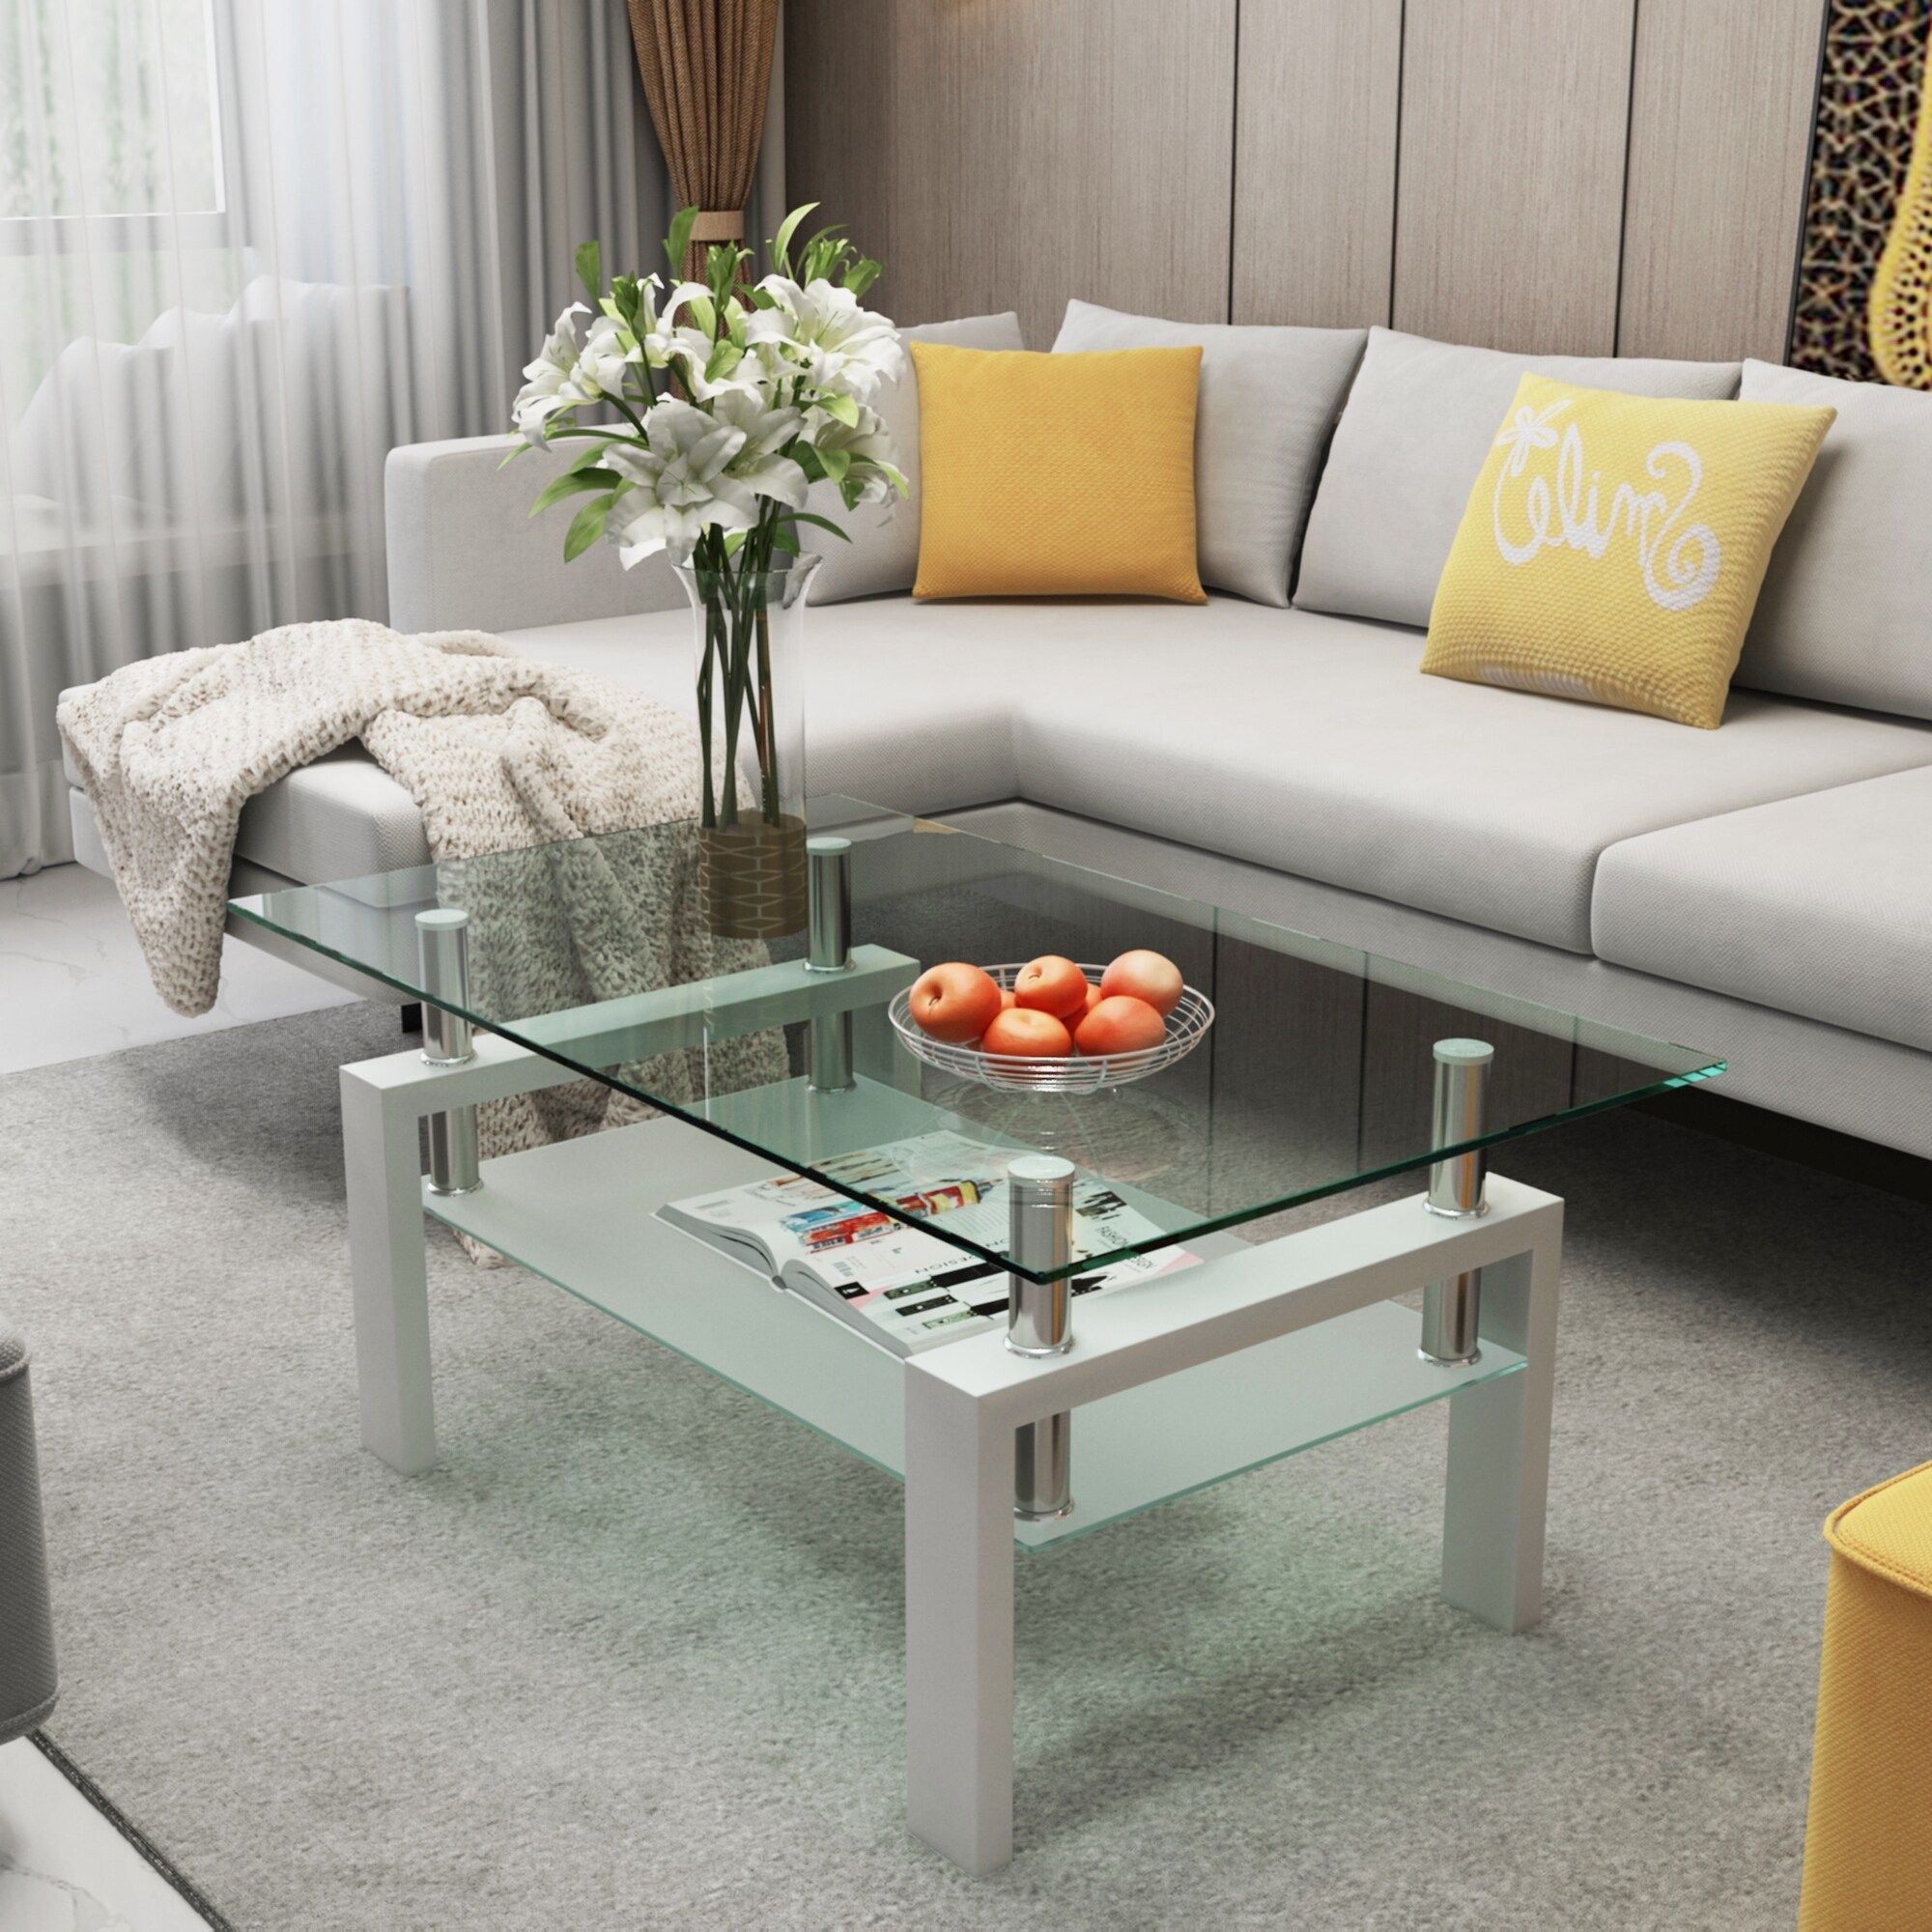 Lavinia Tempered Glass Coffee Table – W39.37Undefinedundefined  *D23.62Undefinedundefined*H (View 7 of 15)